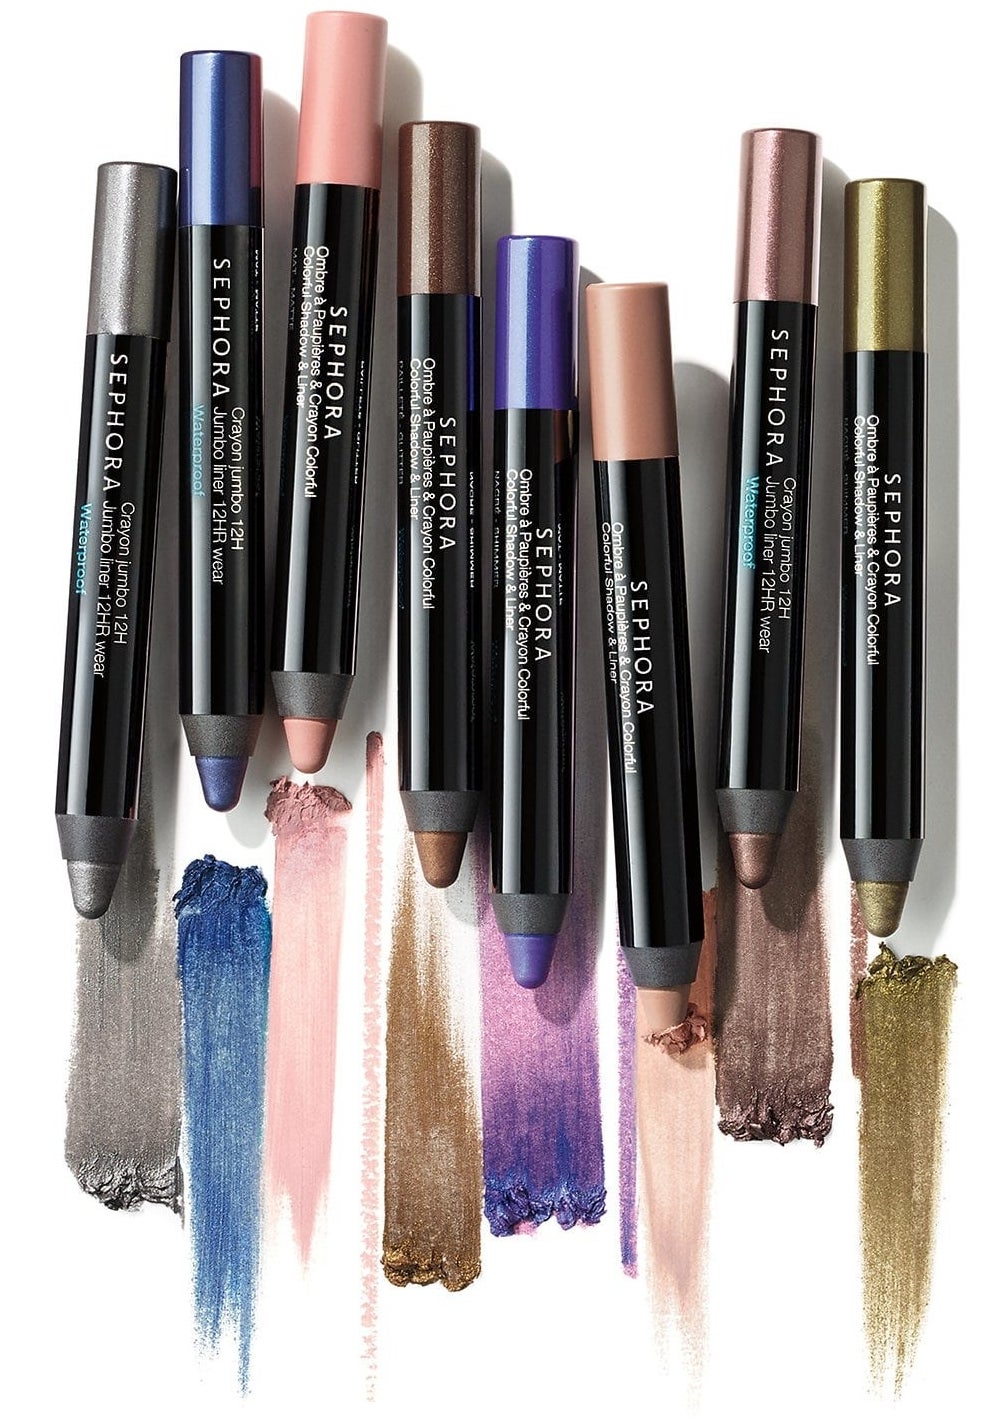 eight colorful shades of the eyeshadow stick